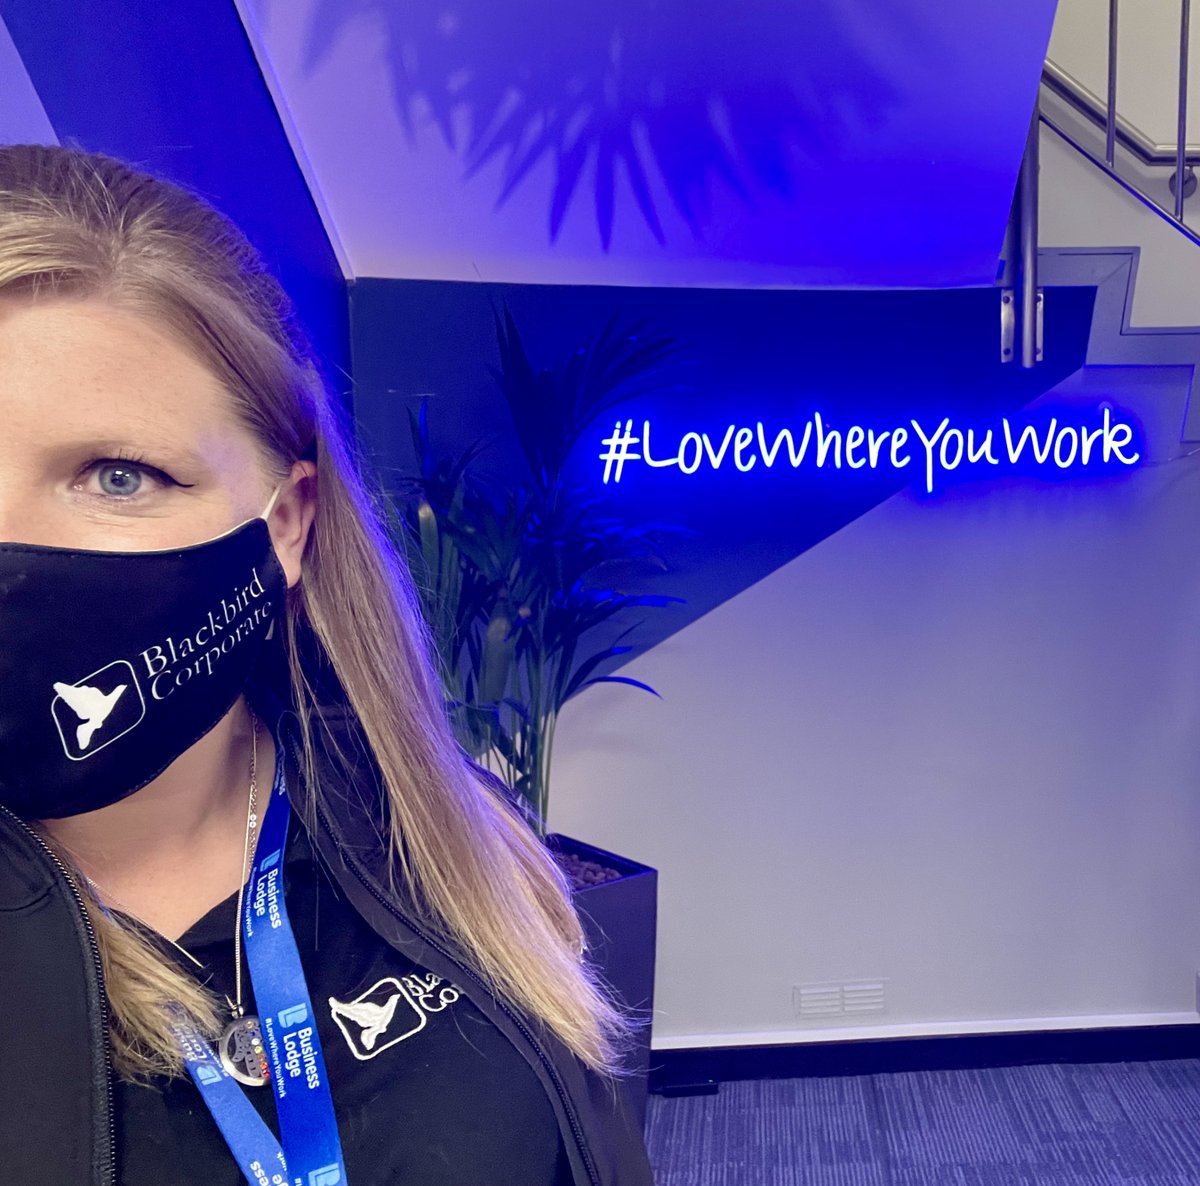 This neon sign at BusinessLodge Stoke is all the motivation we need on a Monday morning #lovewhereyouwork

#wednesdaymotivation #motivationalsign #officesign #smile #work #business #office #motivationalwednesday #wednesday #selfie #UK #training #microsoft #stokeontrent